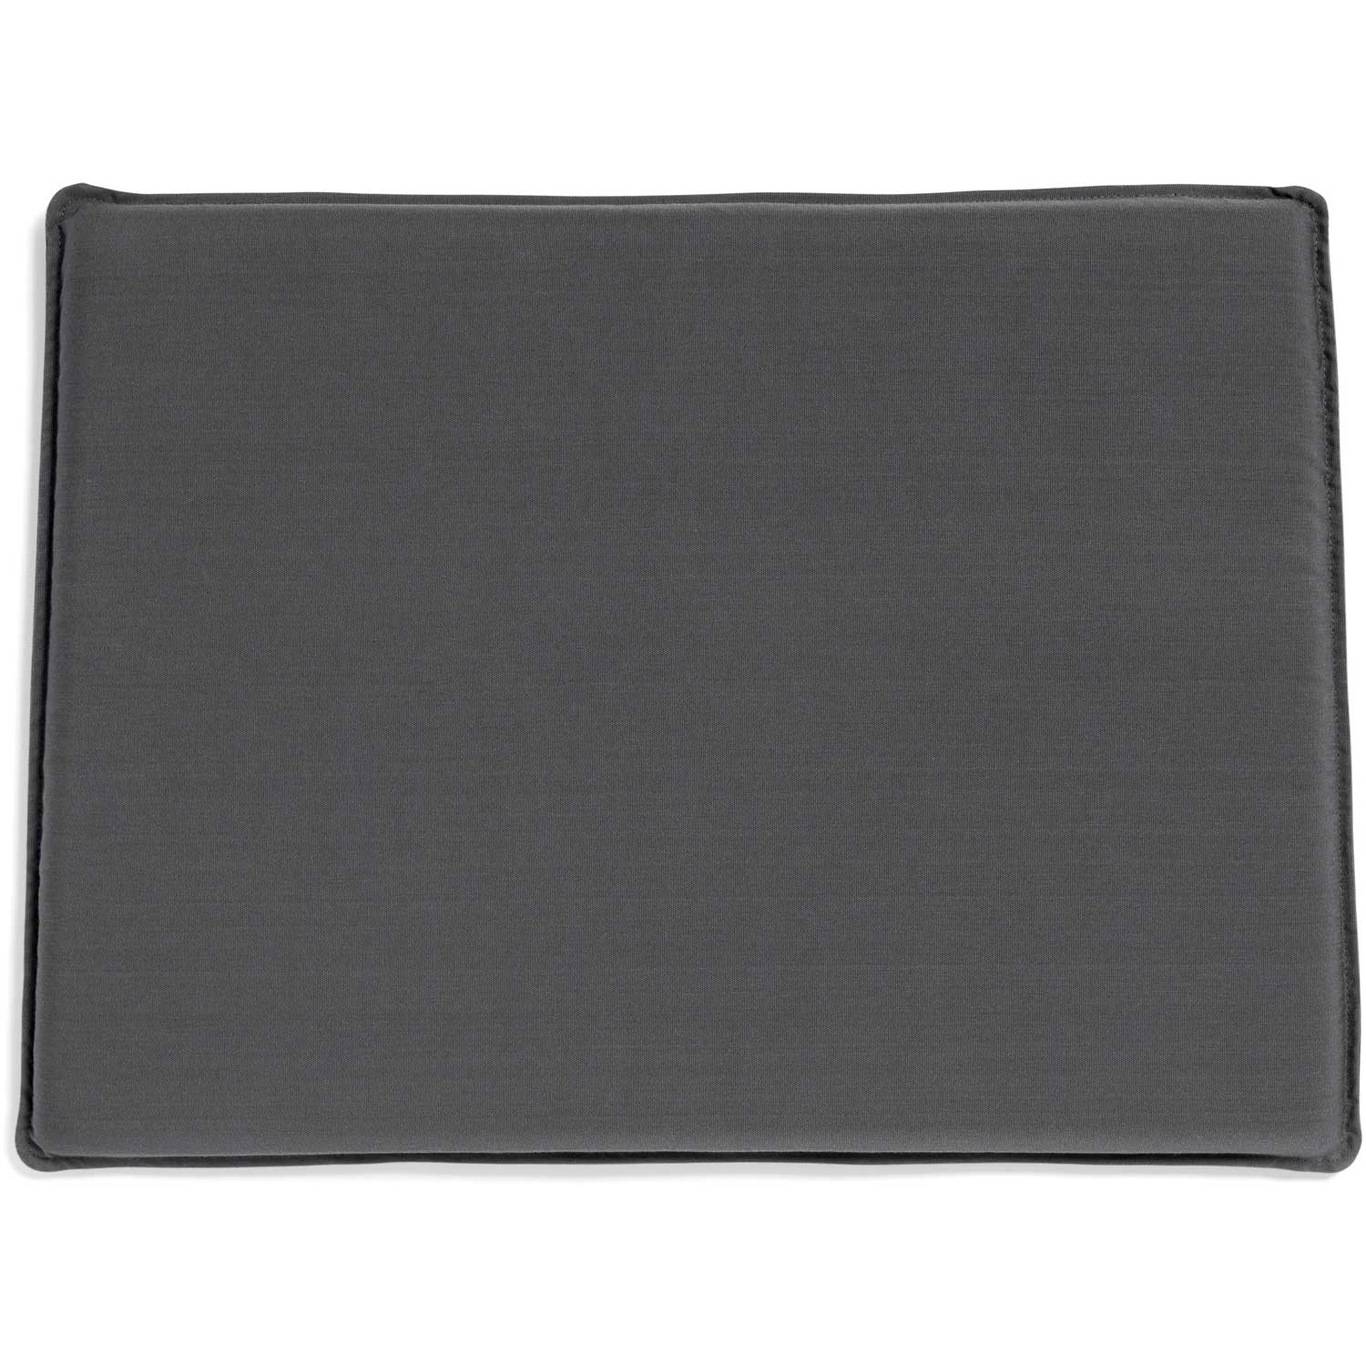 Hee Seat Cushion For Dining Chair, Anthracite